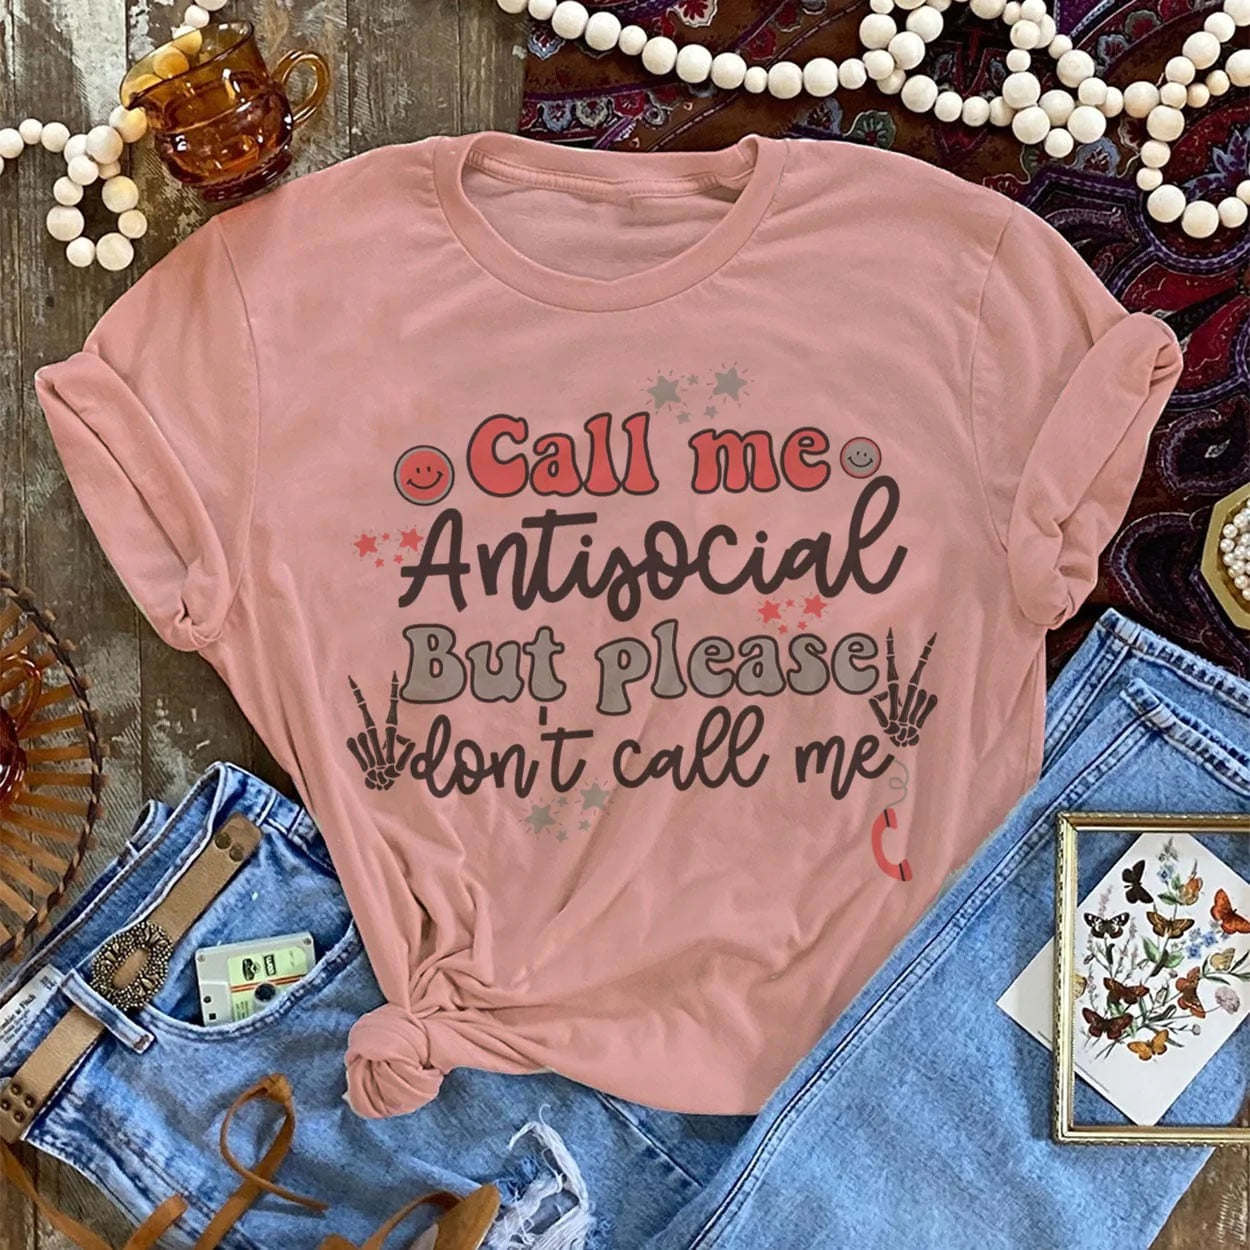 This desert rose pink graphic tee includes a crew neckline, short sleeves, and cute hand drawn design of skeleton hands holding up peace signs, stars, and smiley faces. The words "Call Me Antisocial But Please Don't Call Me" are stacked in the middle of the tee. This tee is shown in this photo as a flat lay, styled with belted denim jeans. 